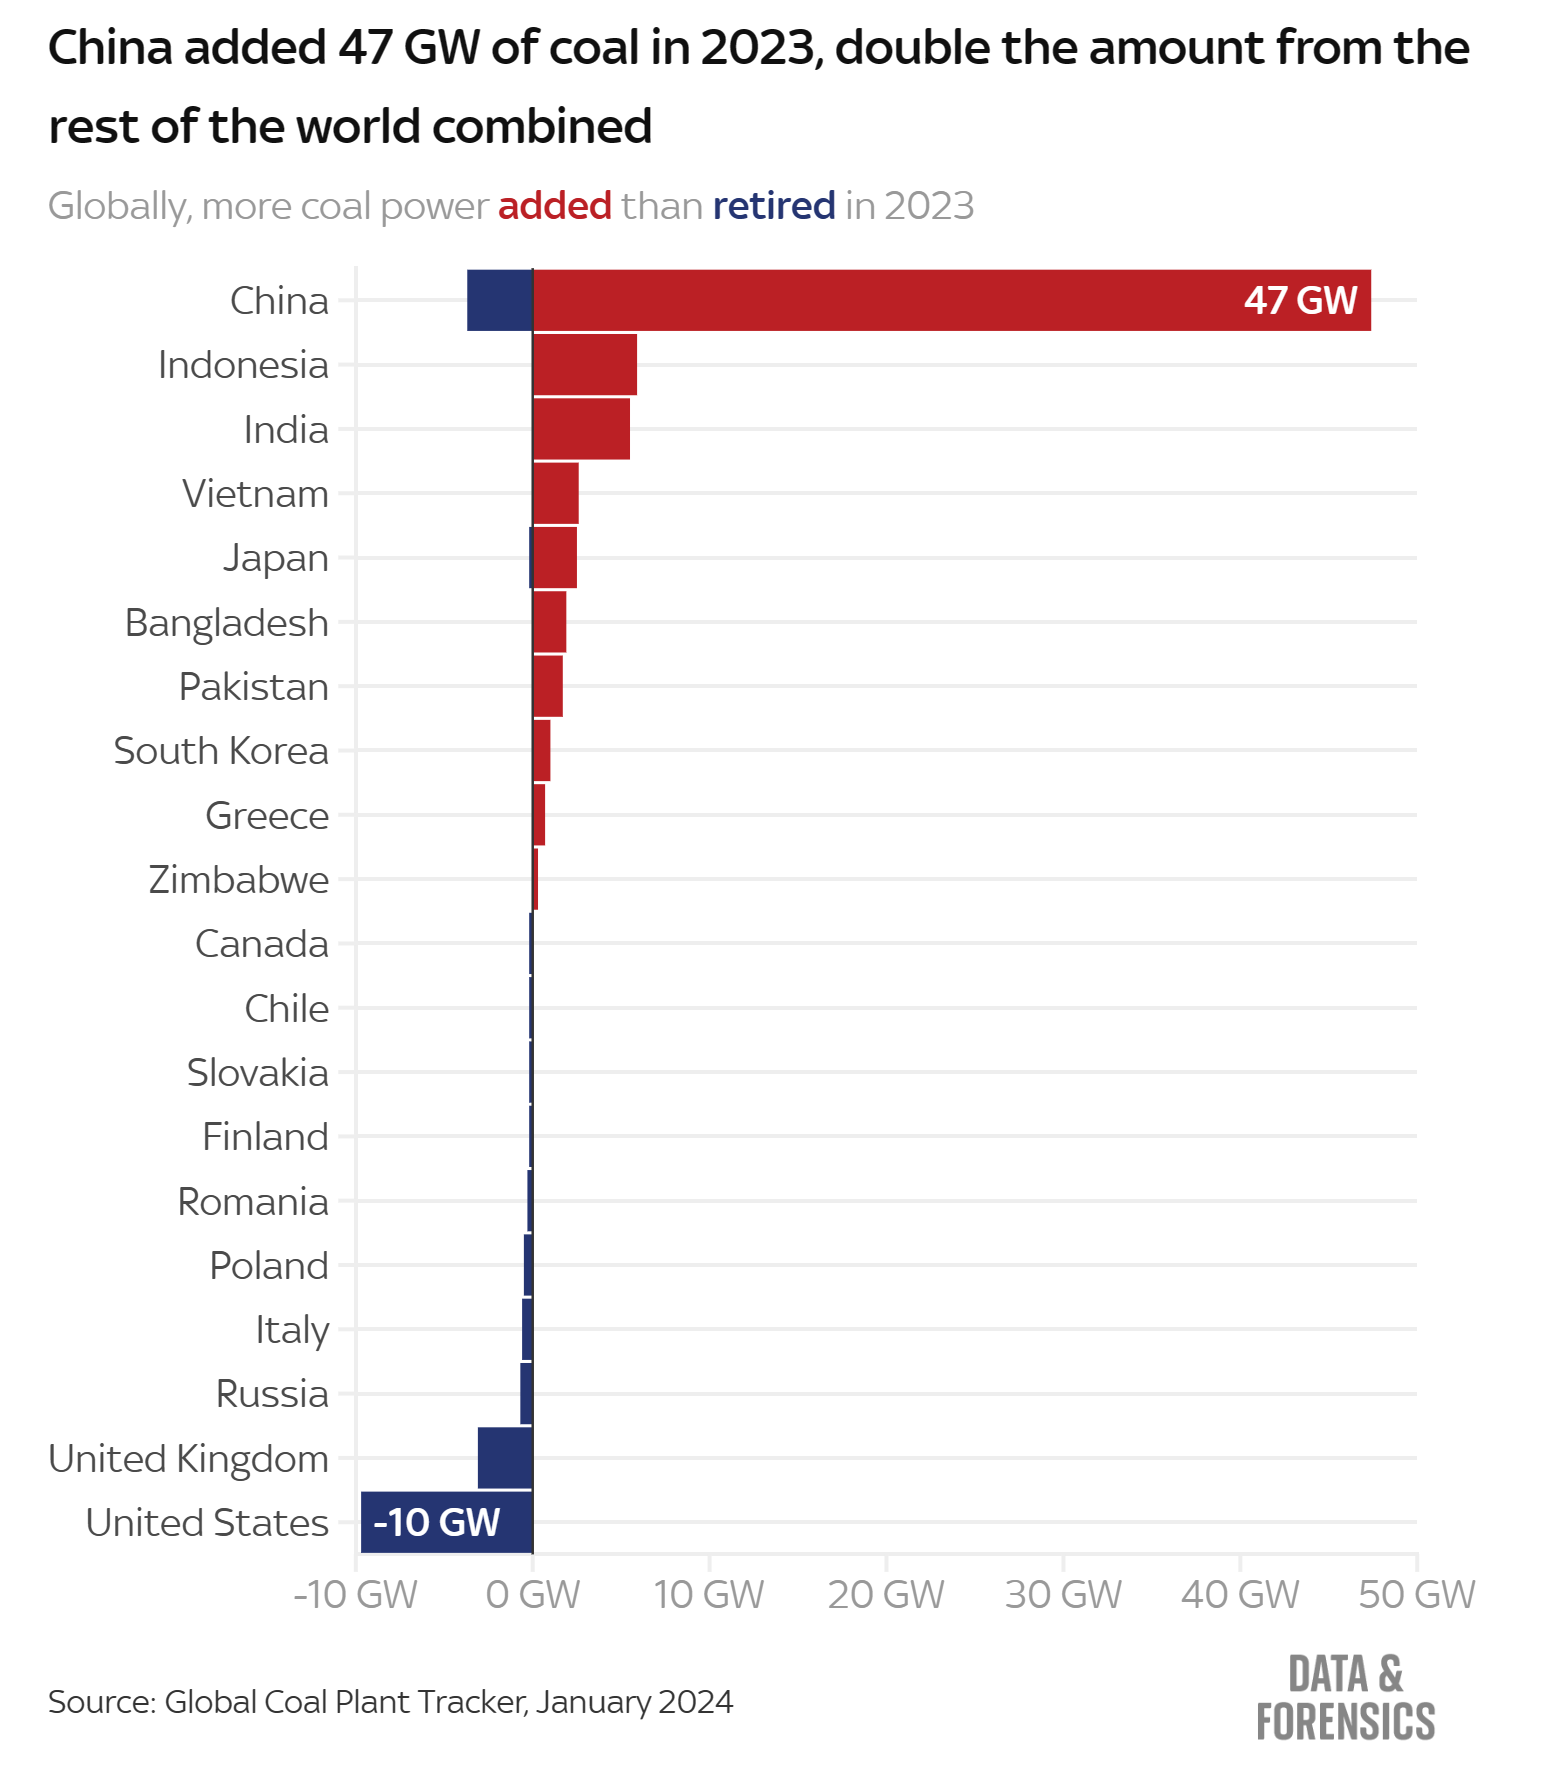 Coal power plant additions and retirements for 20 countries in 2023 (GW). China added 47 GW of coal in 2023, double the amount from the rest of the world combined. Globally, more coal power was added than retired in 2023. Data: GEM Global Coal Plant Tracker, January 2024. Graphic: Daniel Dunford / Sky News